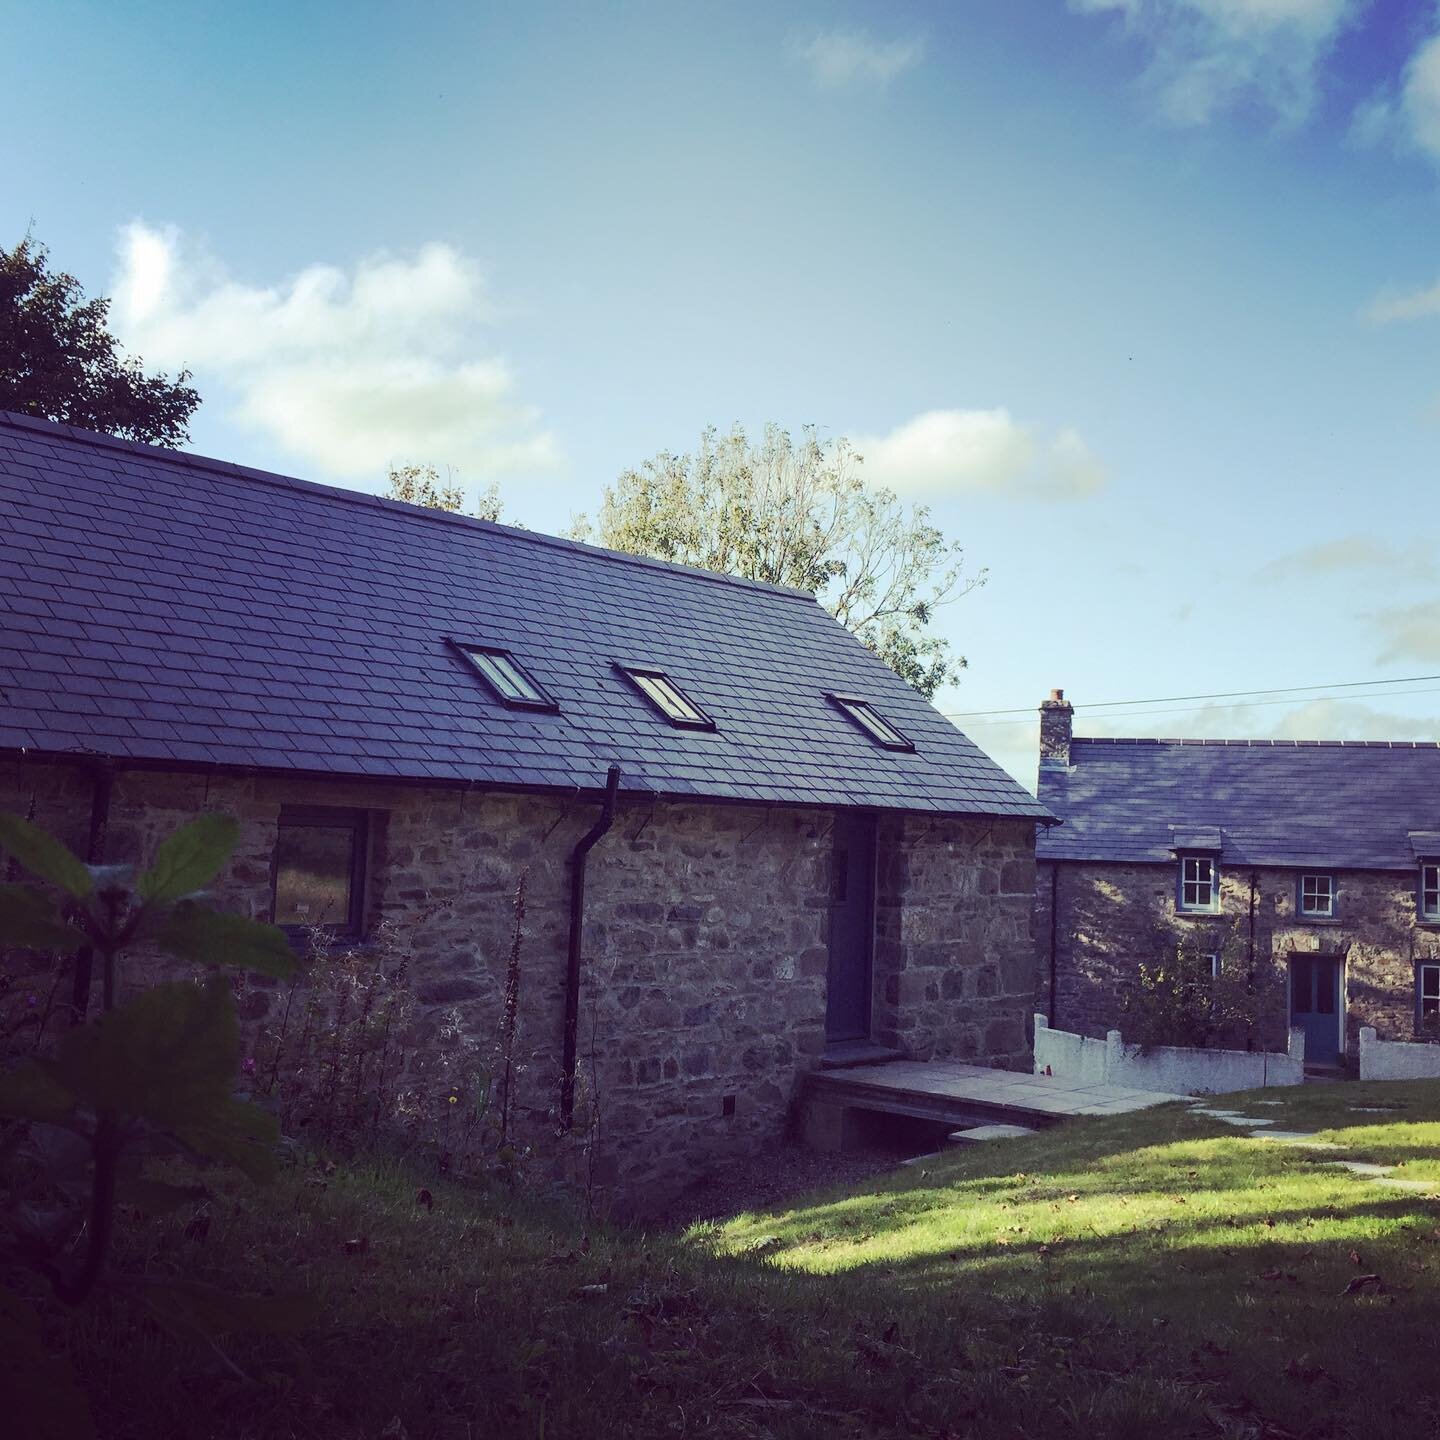 A few photos of a recently completed Grade 2 listed mill conversion for the Newport Castle estate in Pembrokeshire.  #listedbuildings #millconversion #westwales #pembrokeshire #pembrokeshirecoast #pembrokeshirearchitect #cardiganarchitect #welshschoo